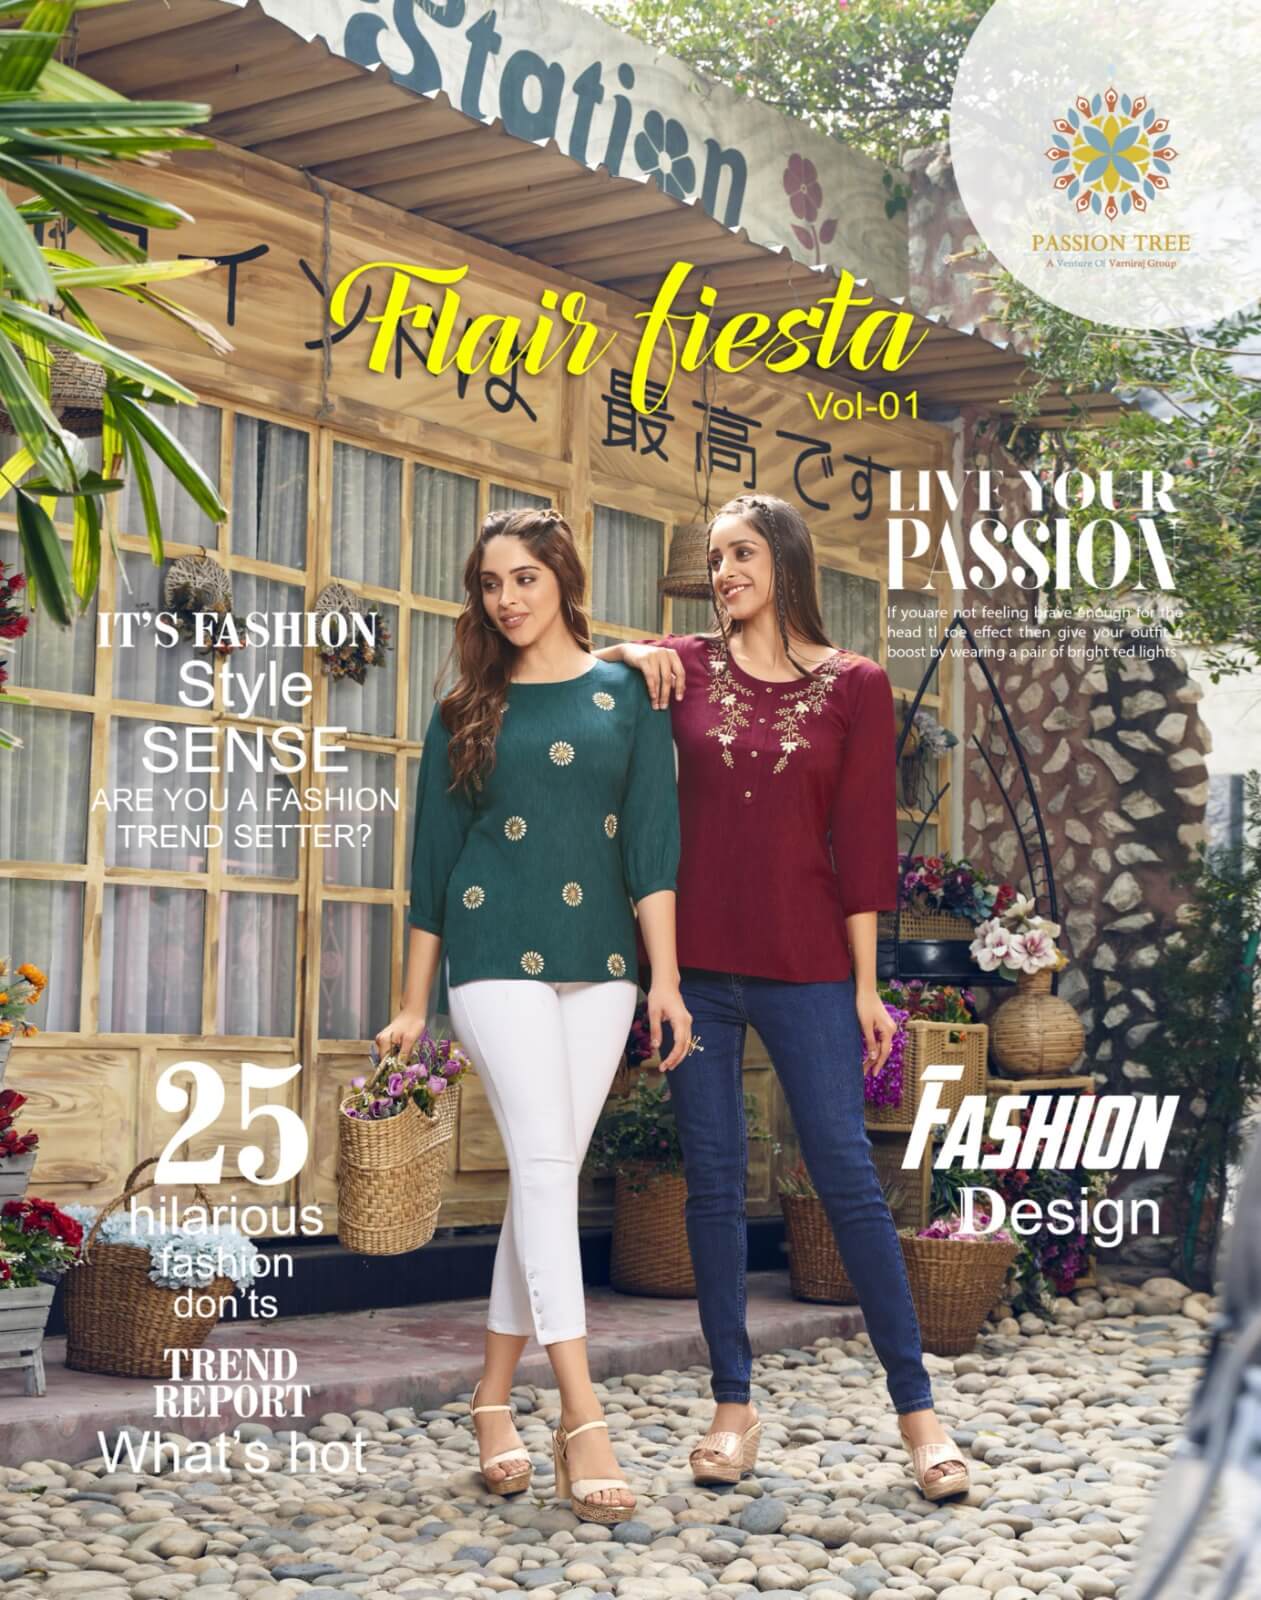 Passion Tree Flair Fiesta vol 1 Short Tops Catalog in Wholesale